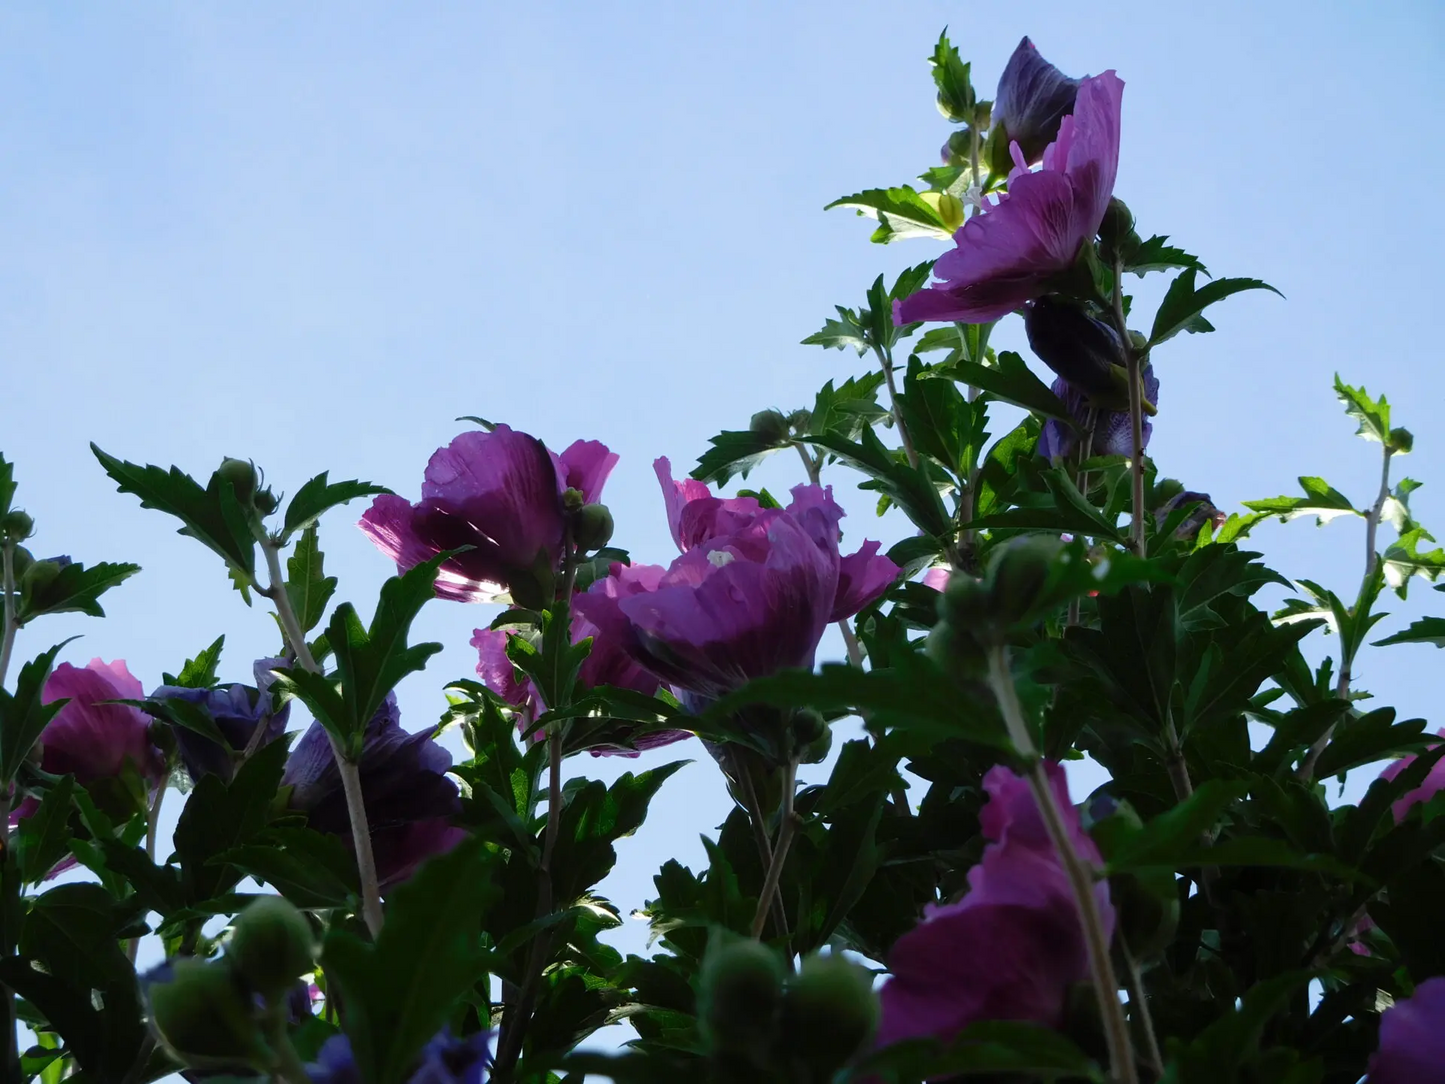 Rose Of Sharon For Sale | Buy Althea "Hibiscus Syriacus" Shrub Online